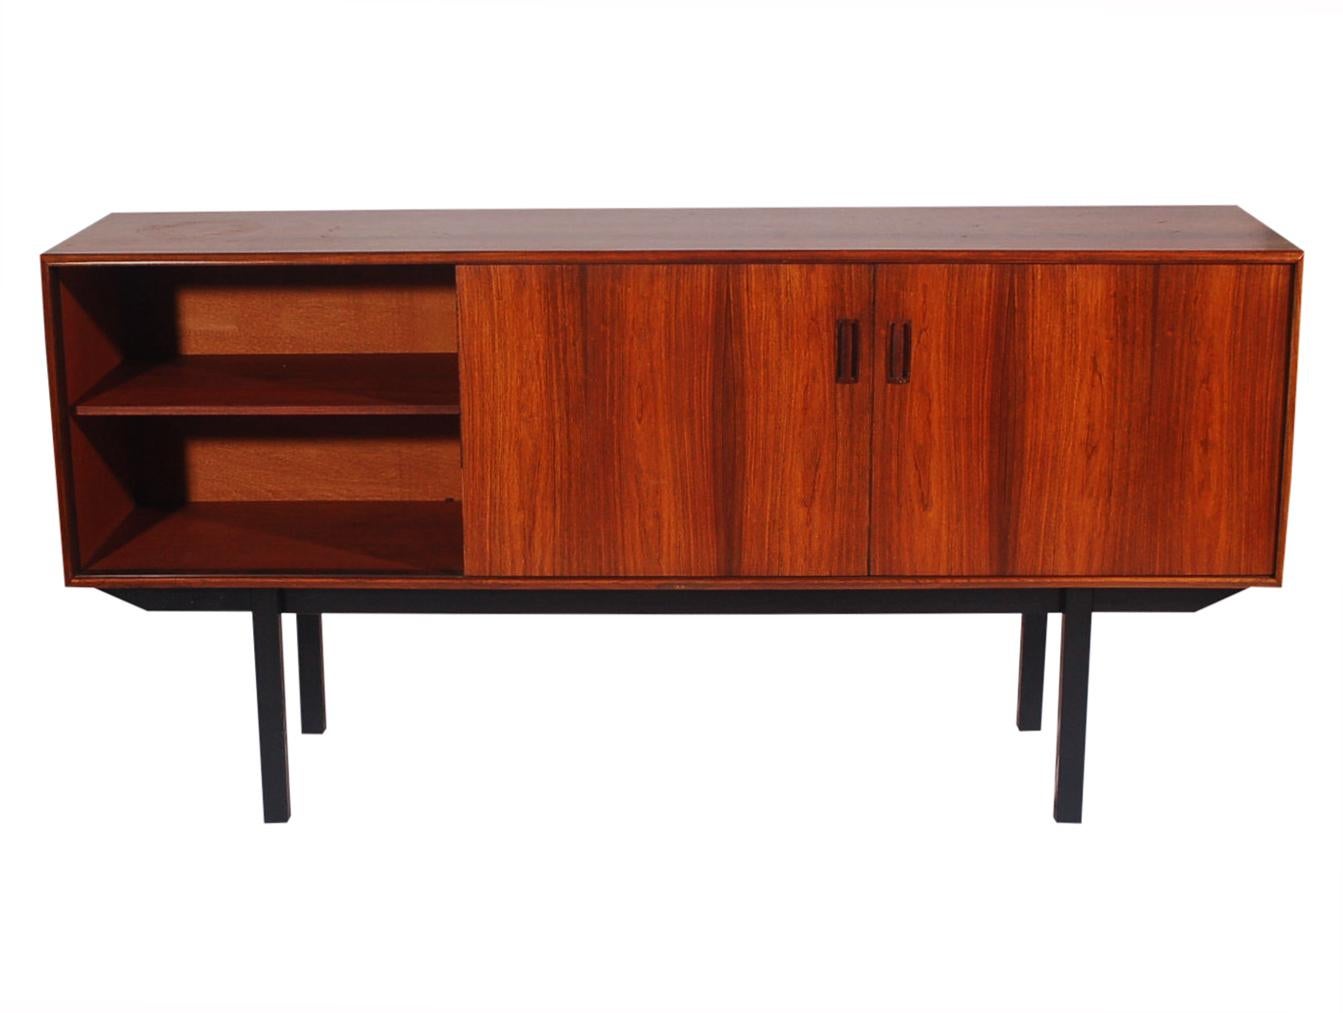 Wood Midcentury Danish Modern Credenza or Cabinet in Rosewood with Black Legs